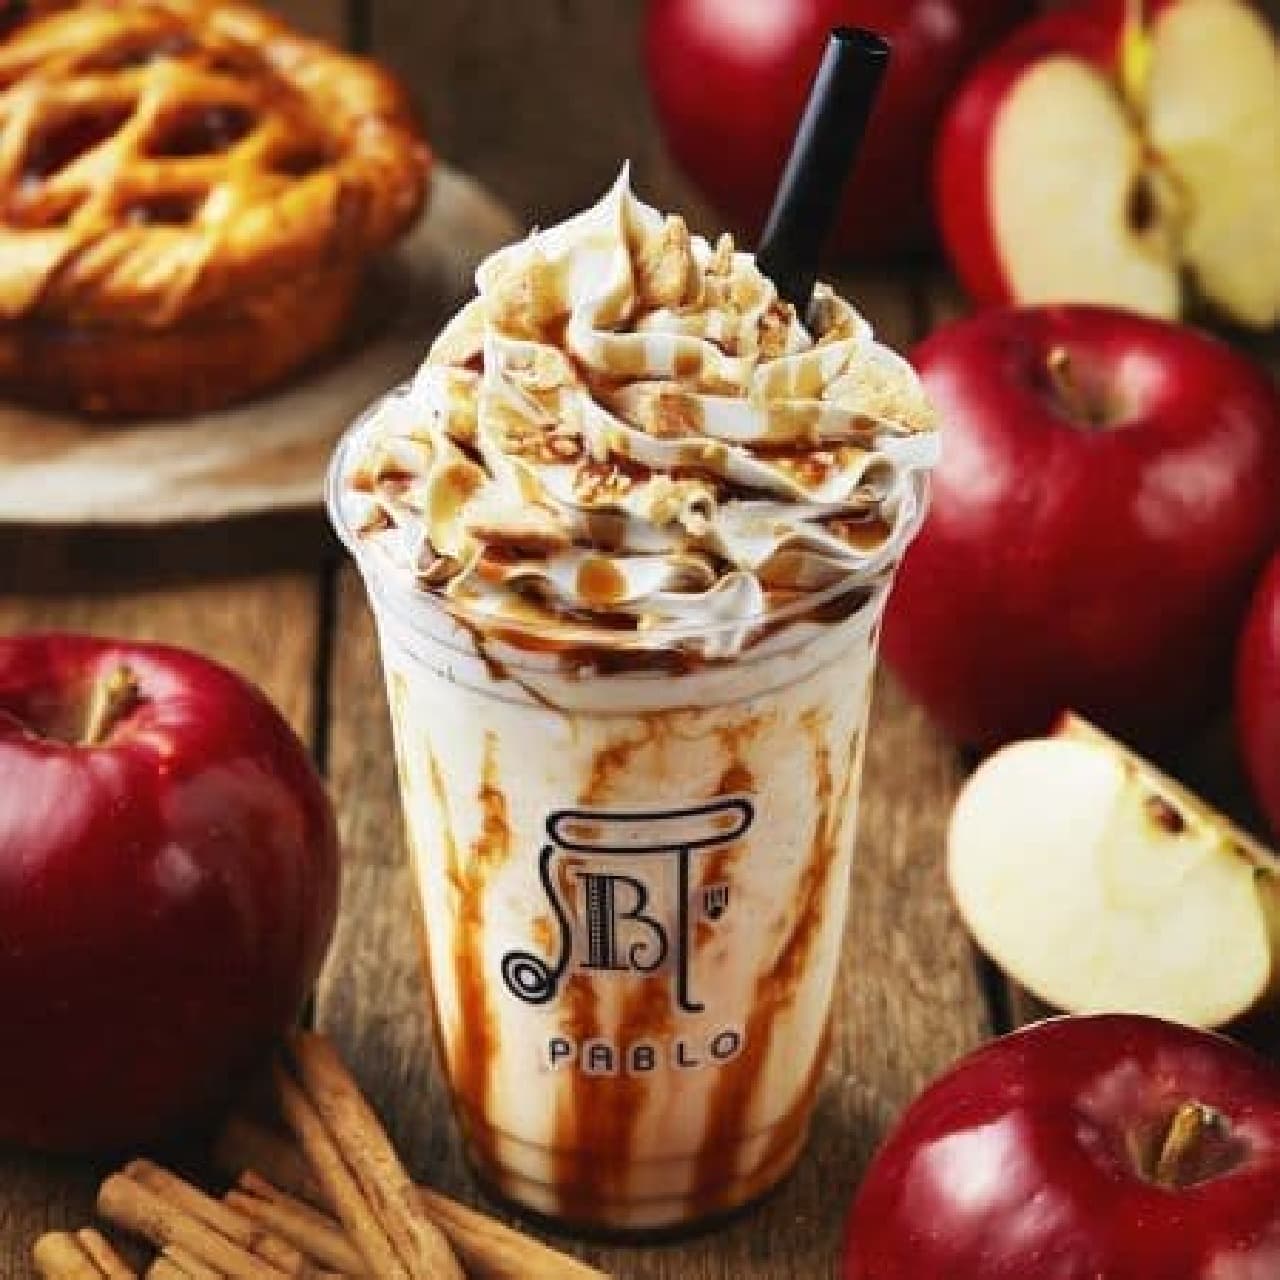 "Pablo Smoothie Apple Pie" is a smoothie with the image of an apple pie.